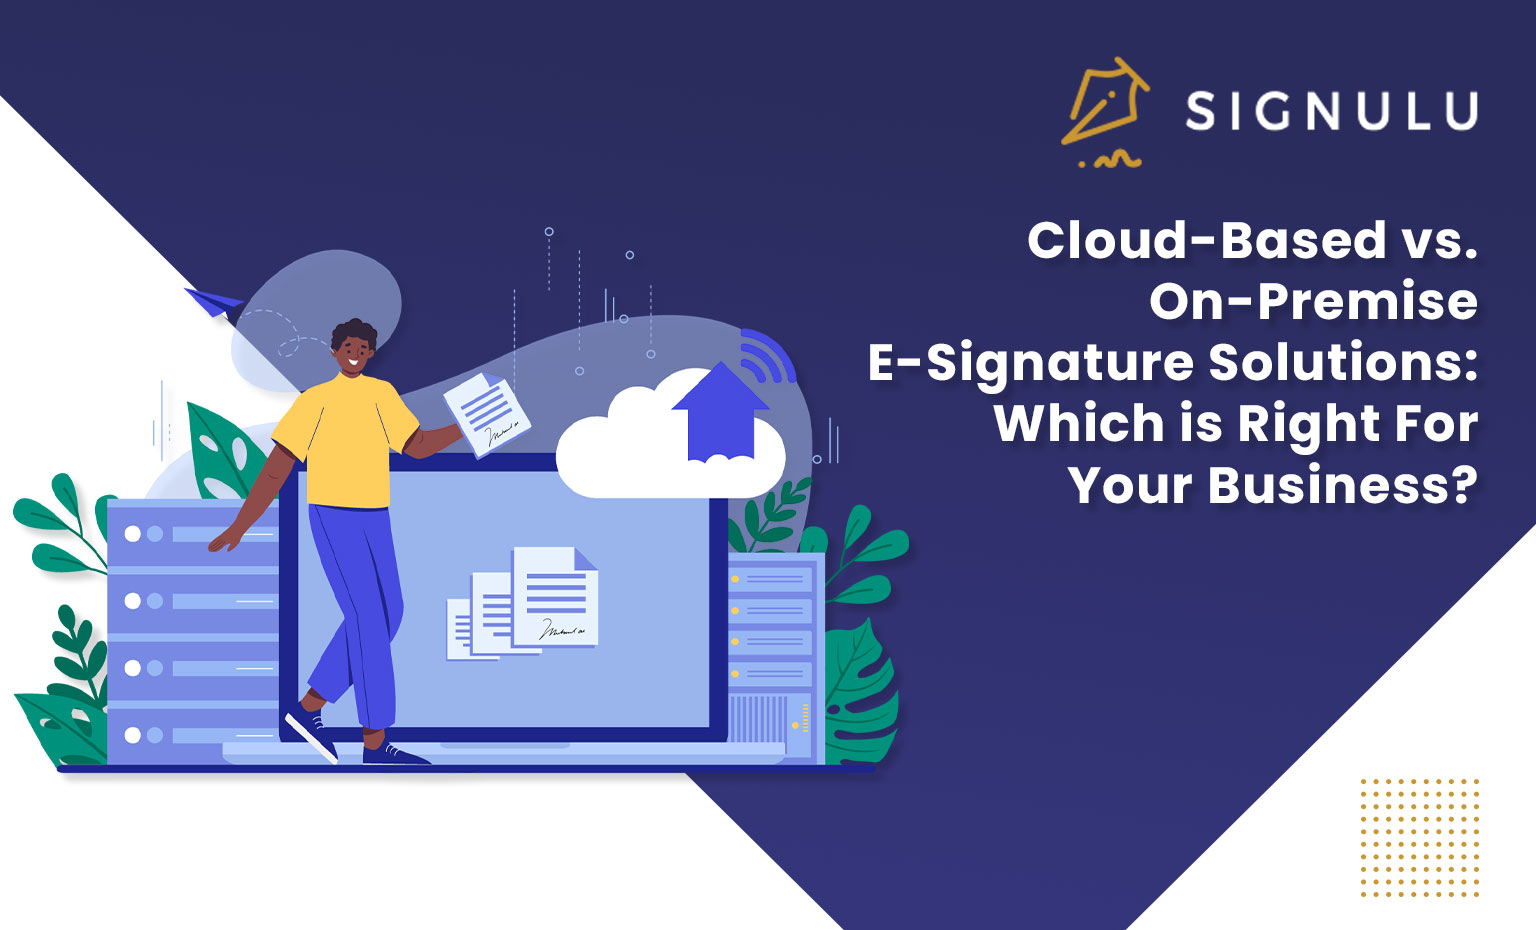 Cloud-Based vs. On-Premise E-Signature Solutions: Which is Right for Your Business?